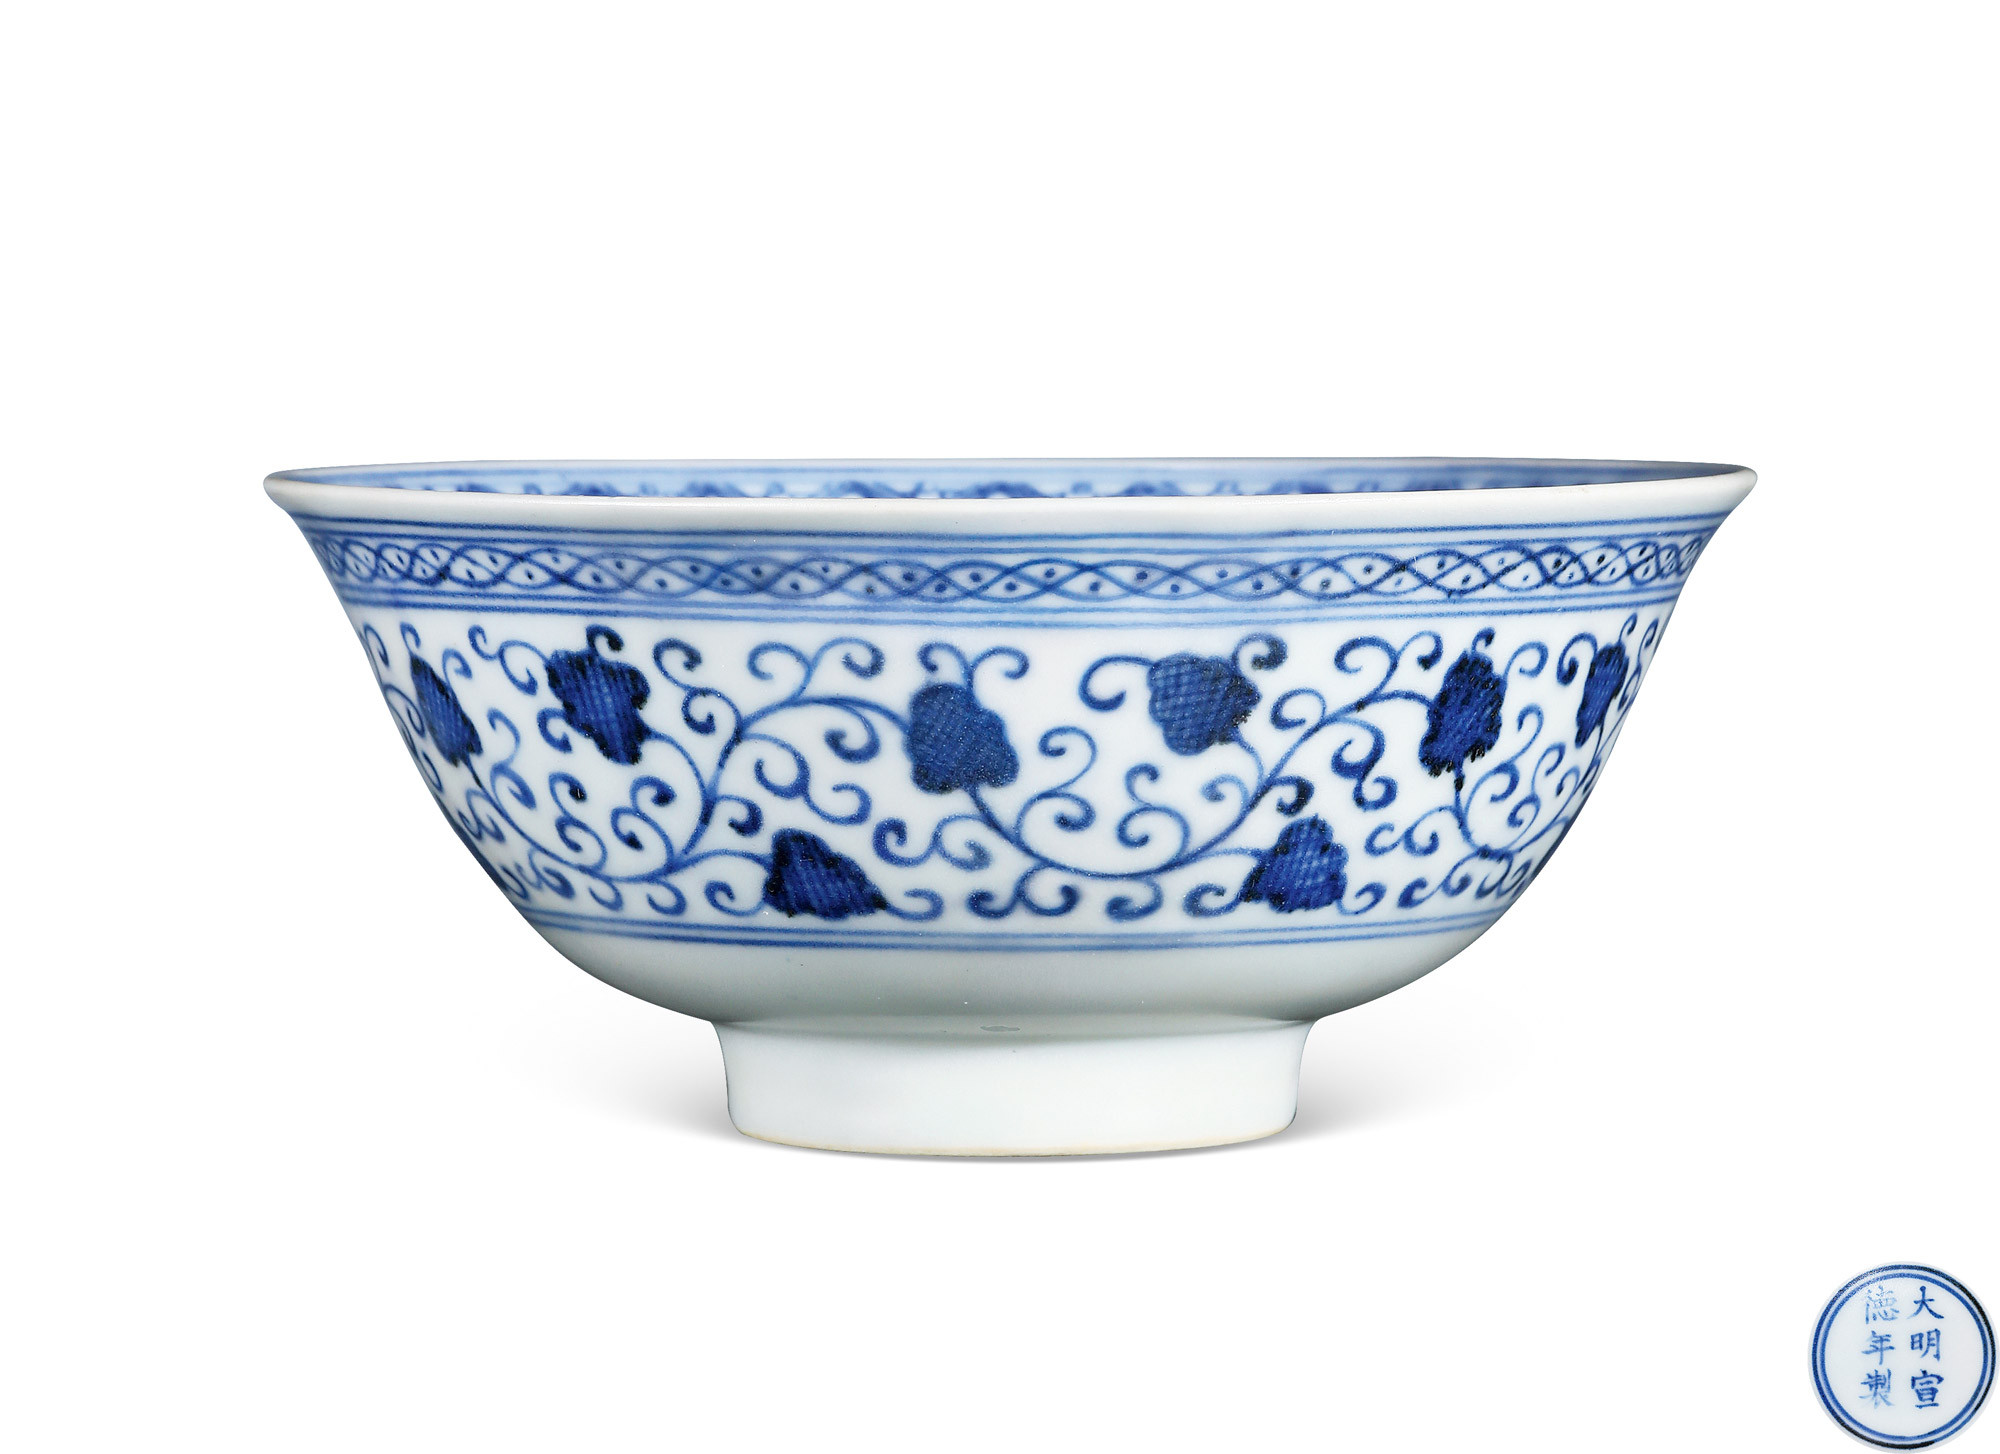 A BLUE AND WHITE BOWL WITH FLOWER DESIGN